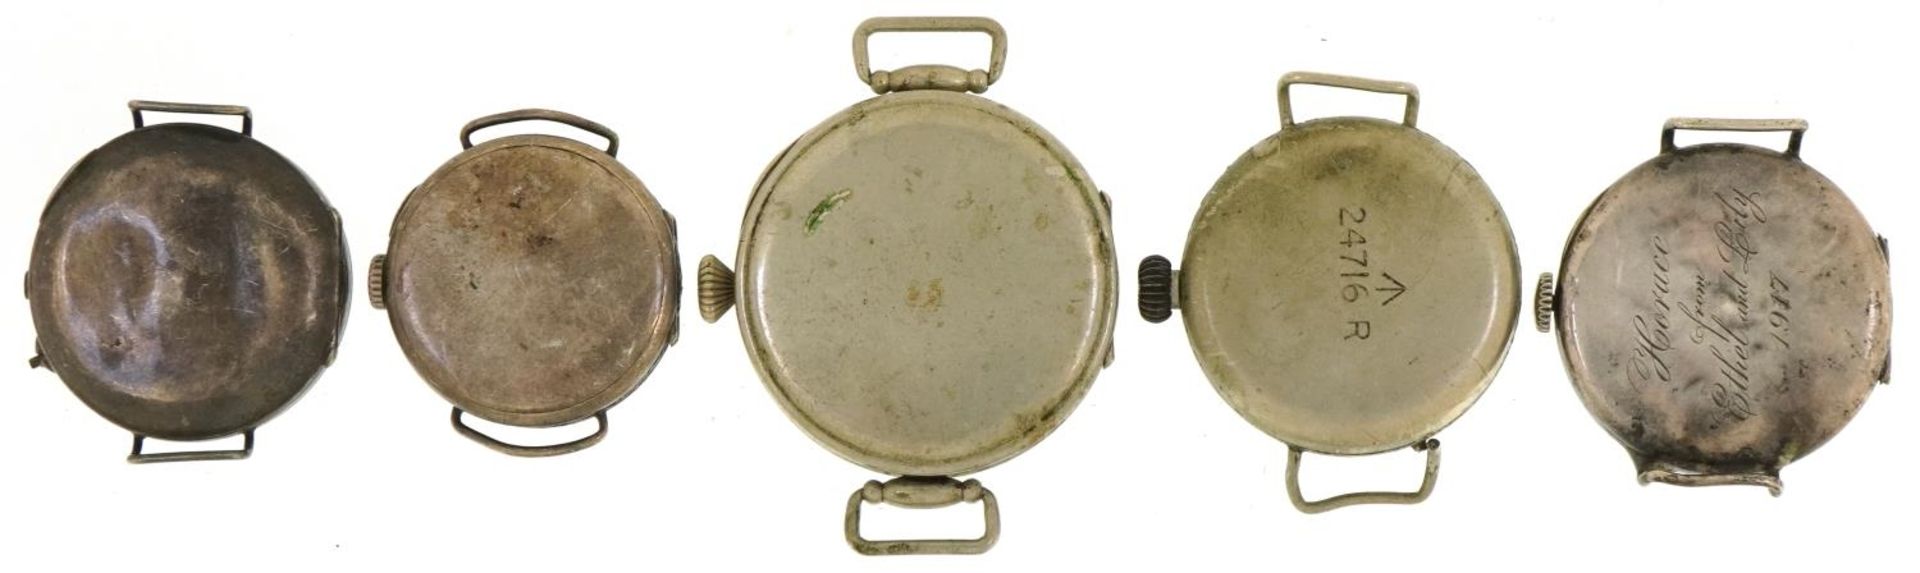 Five military interest trench style wristwatches, two silver, one engraved 24716 R, the largest 37mm - Image 2 of 5